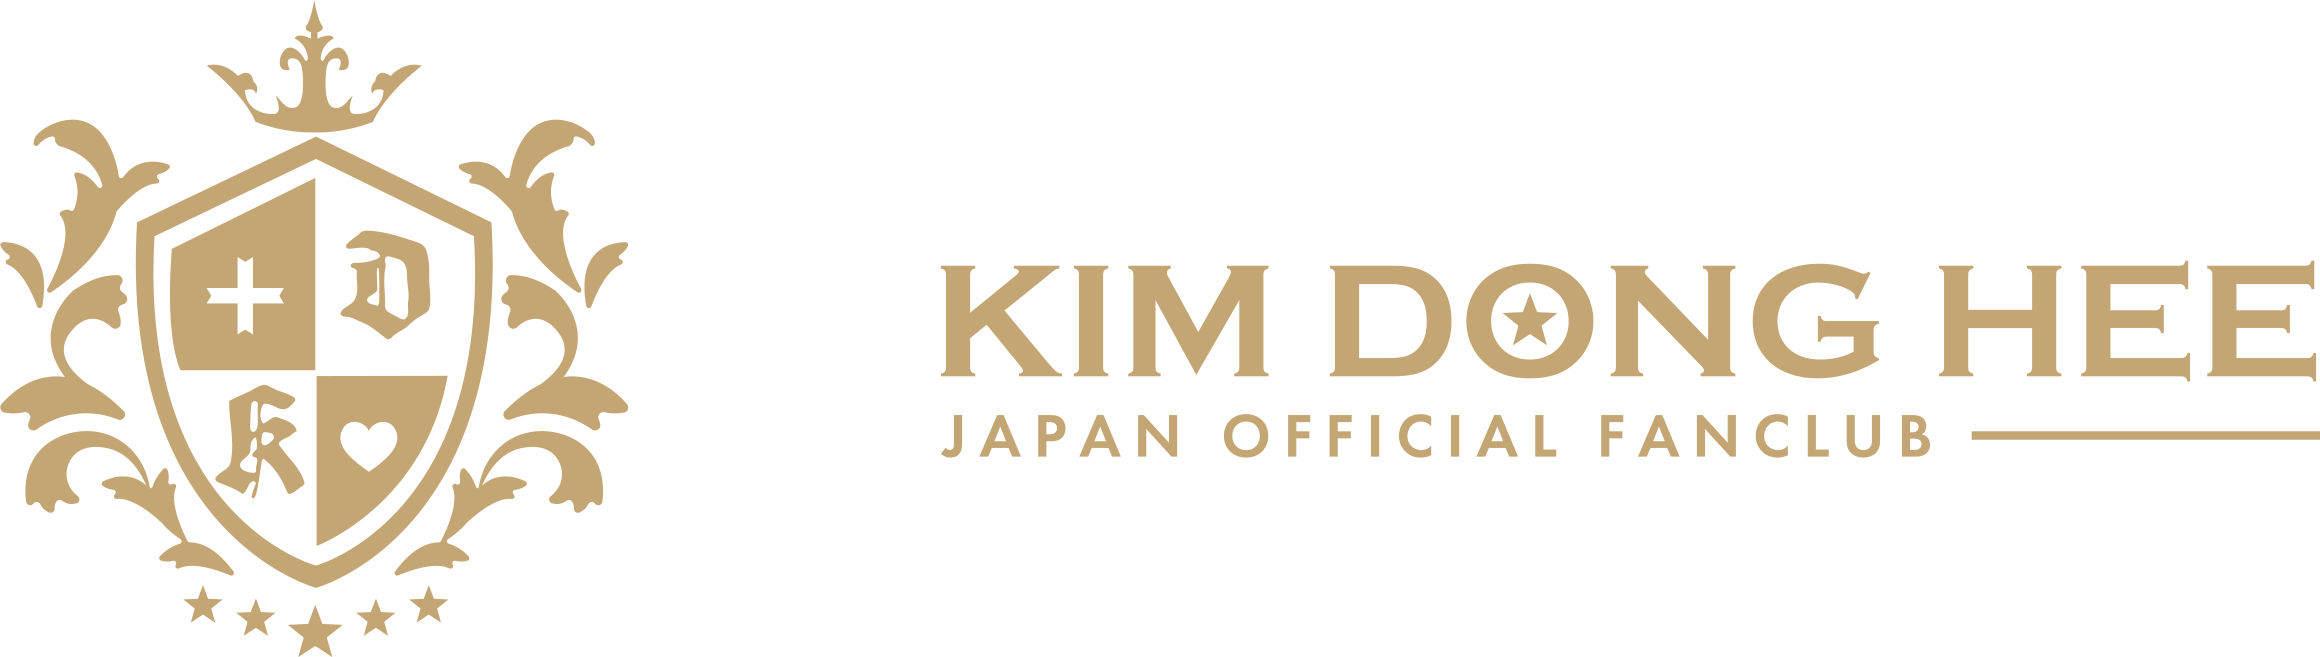 KIM DONG HEE JAPAN OFFICIAL FANCLUB